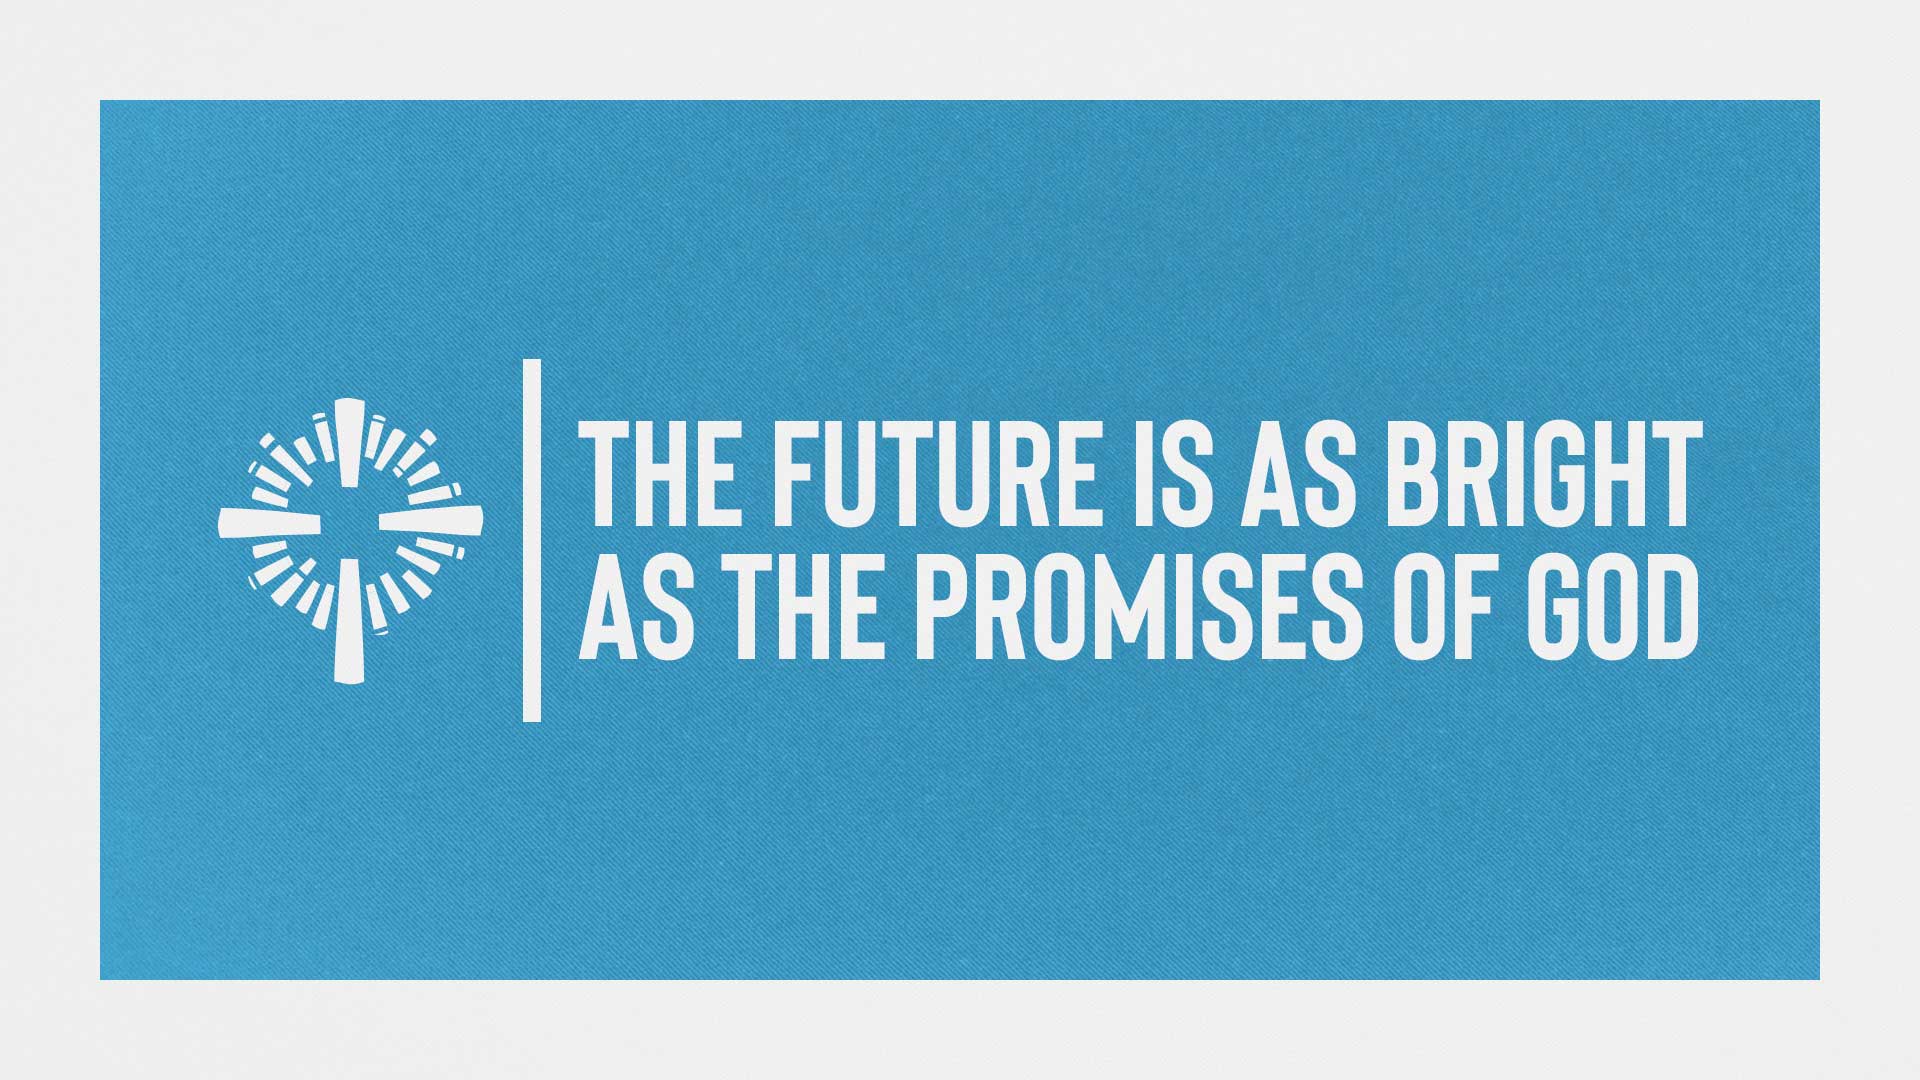 The Future is as Bright as the Promises of God